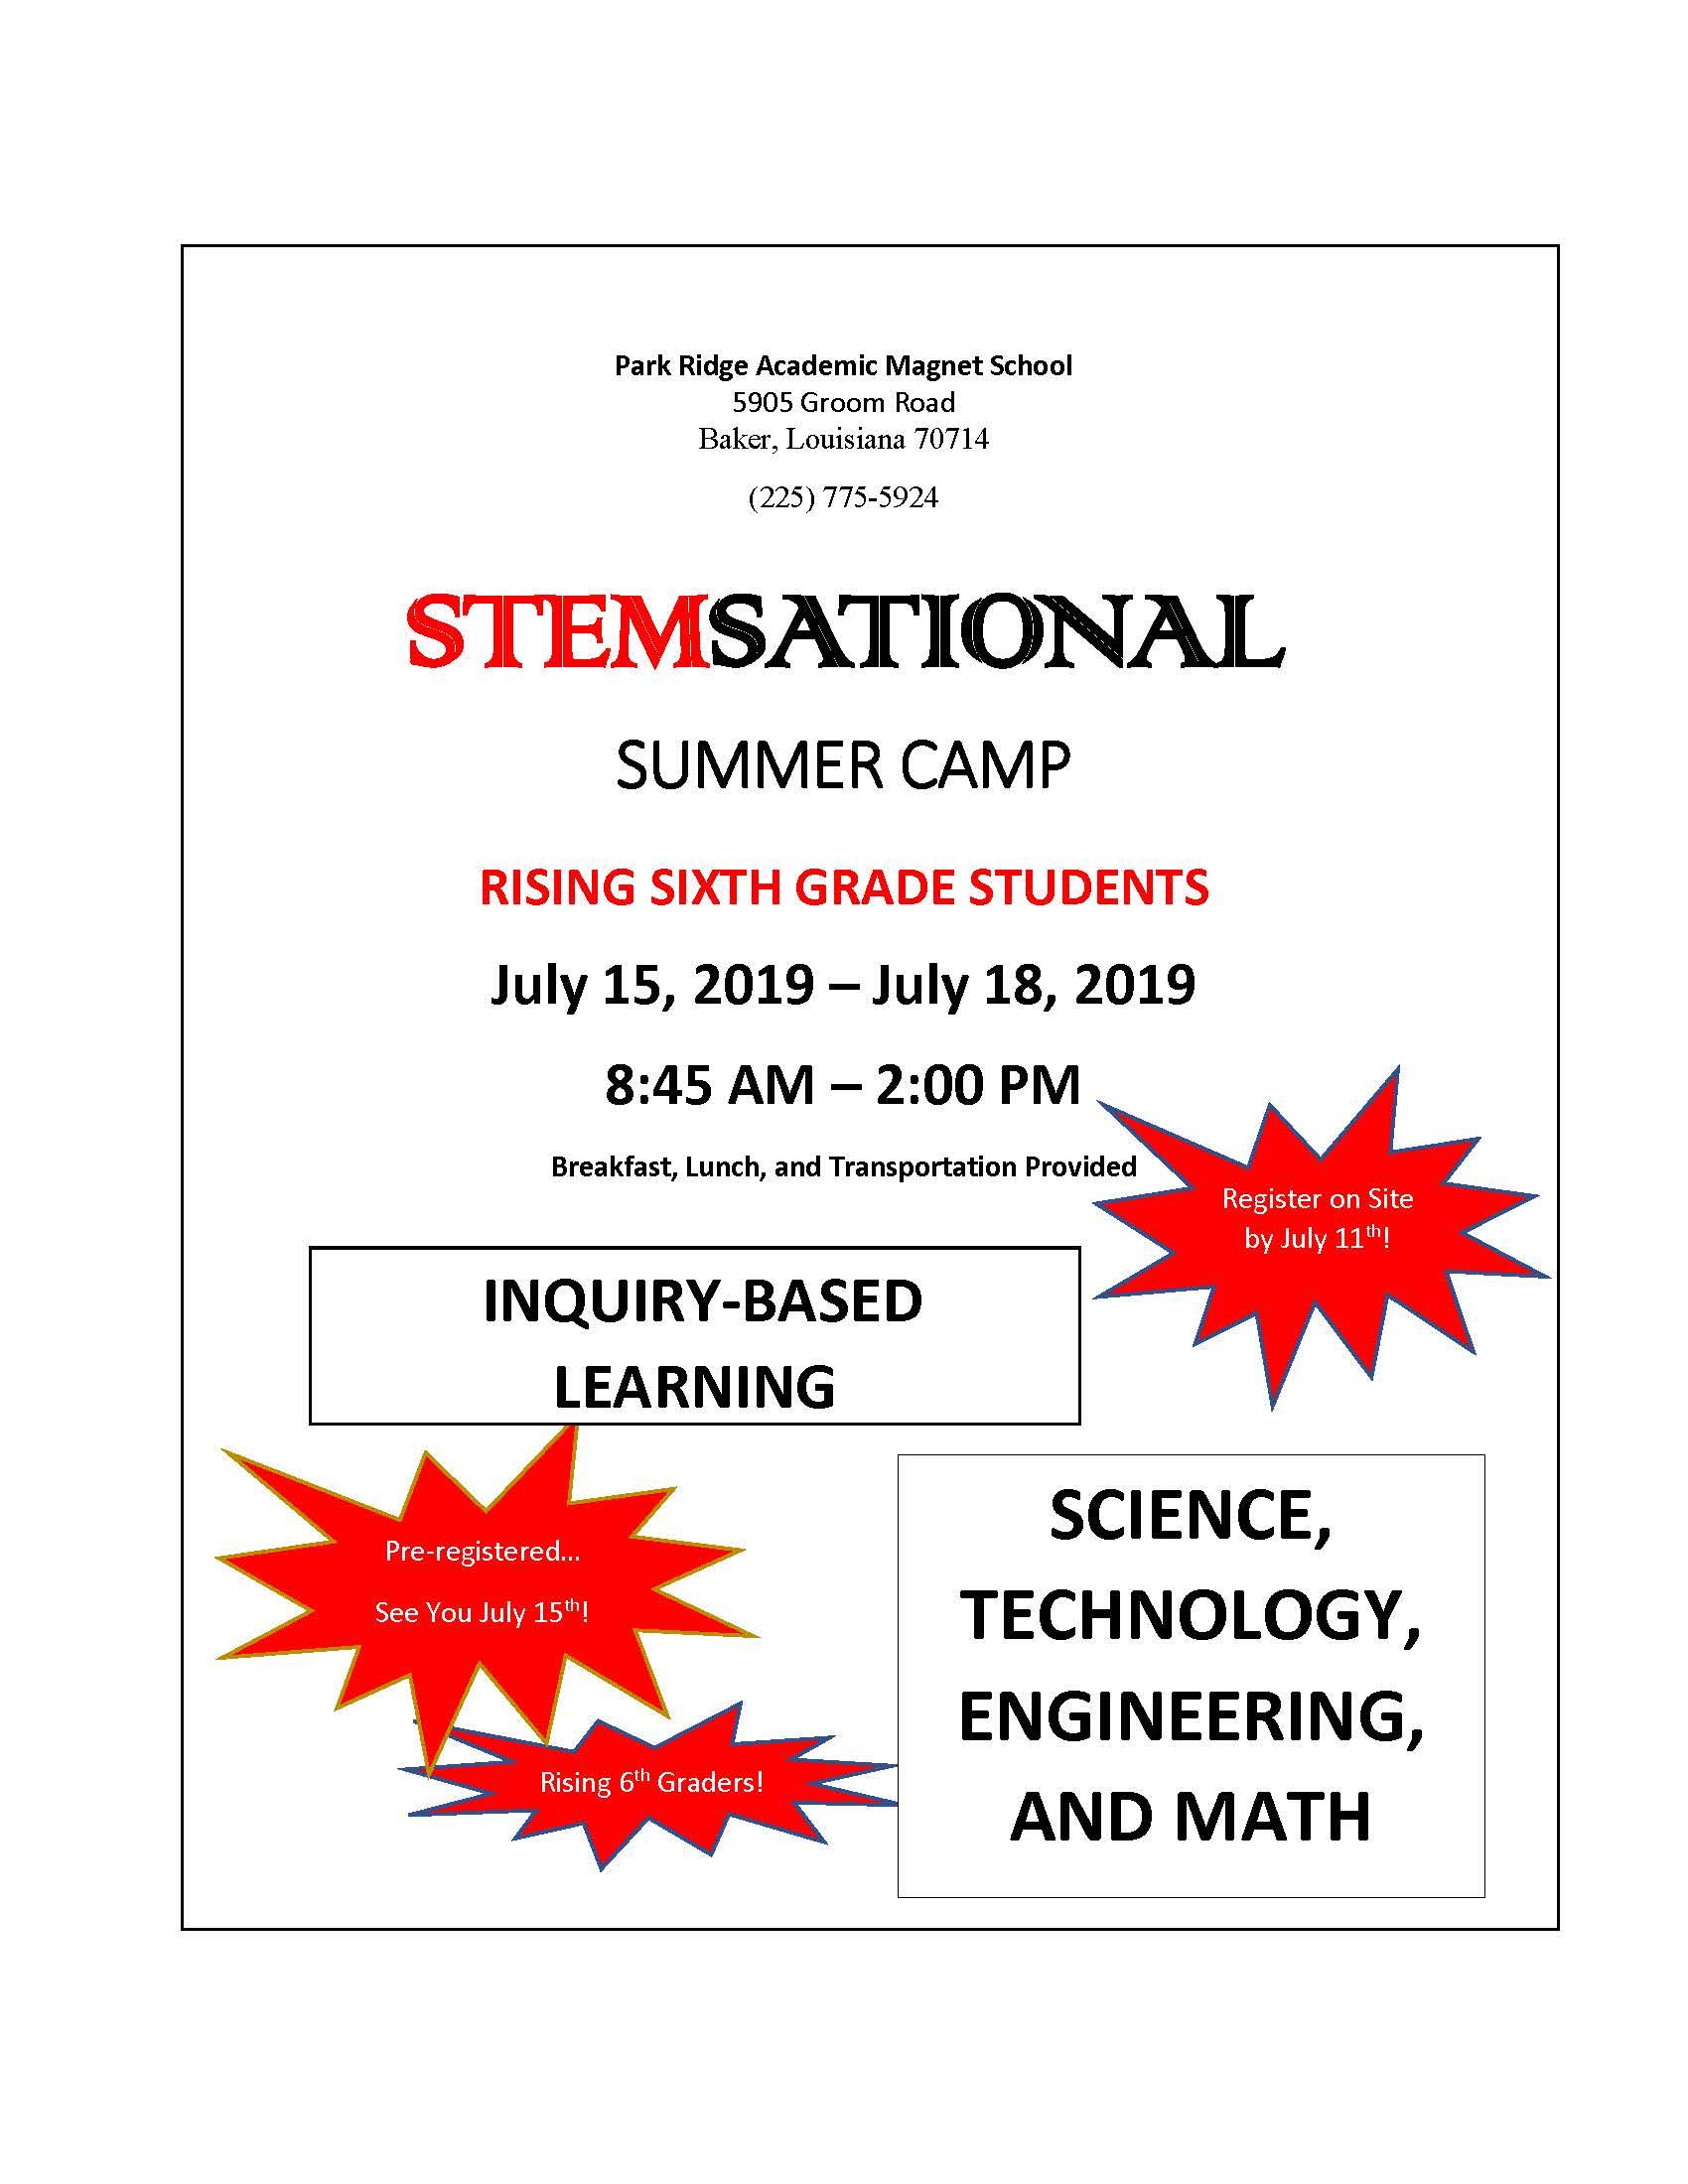 A graphic of the poster advertising the 6th grade STEM camp at Park Ridge